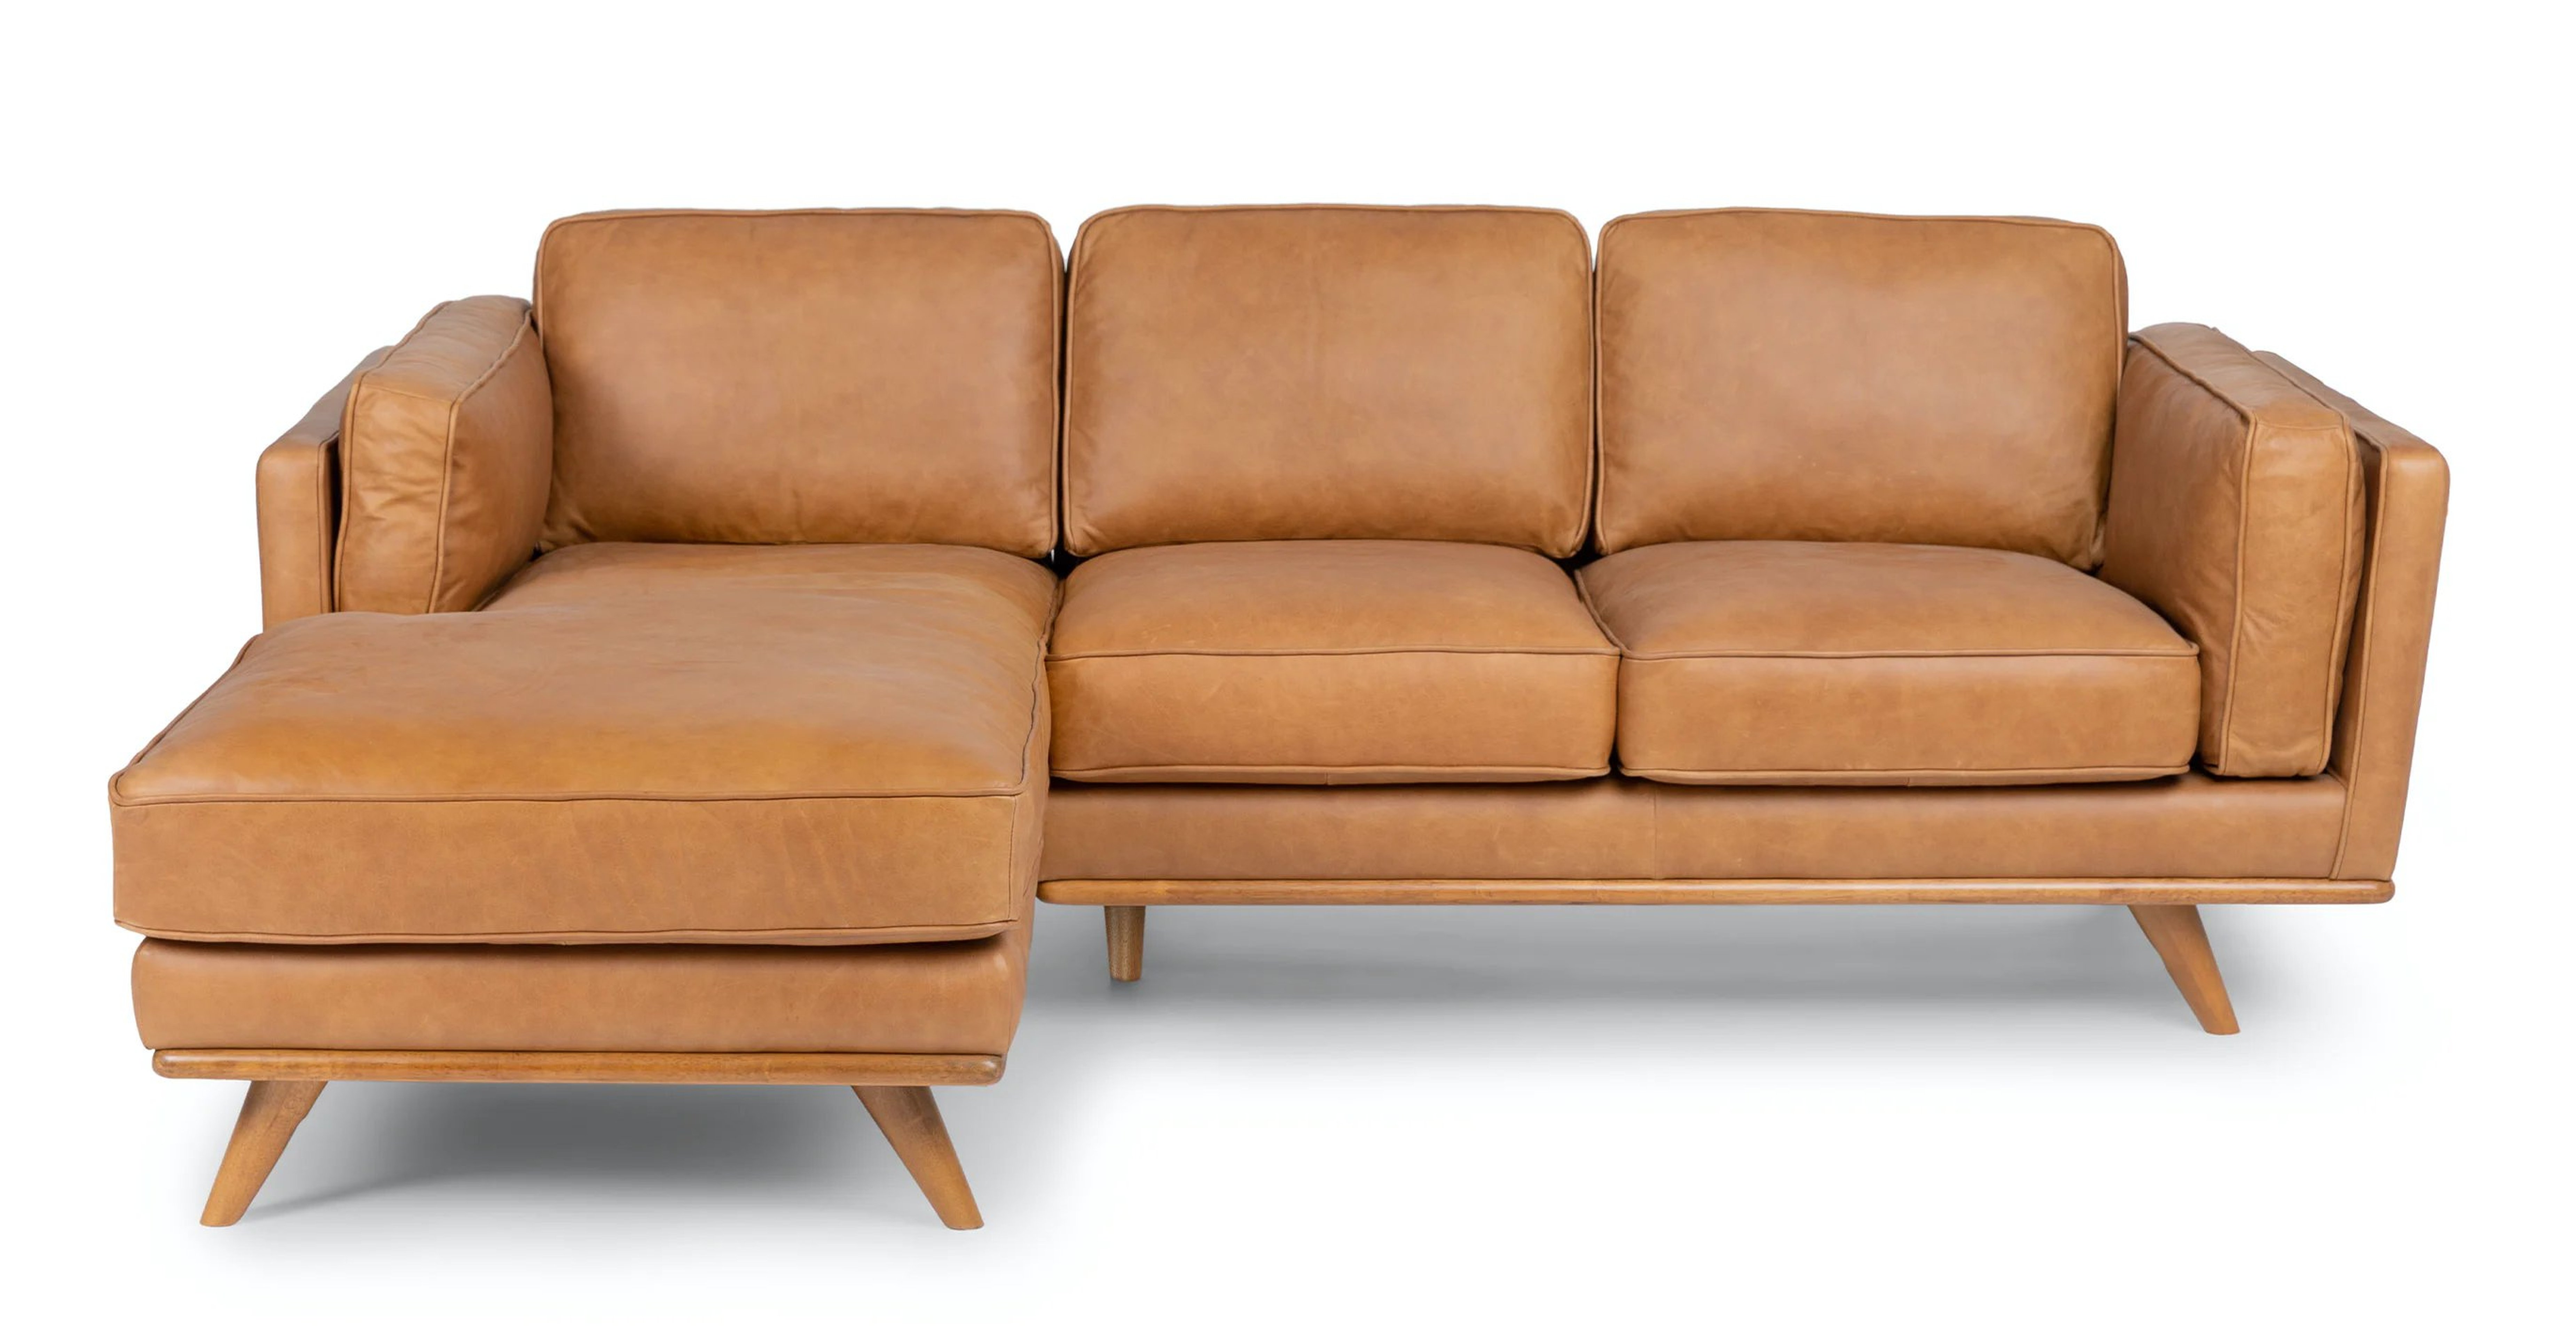 Timber Charme Tan Left Sectional - Article